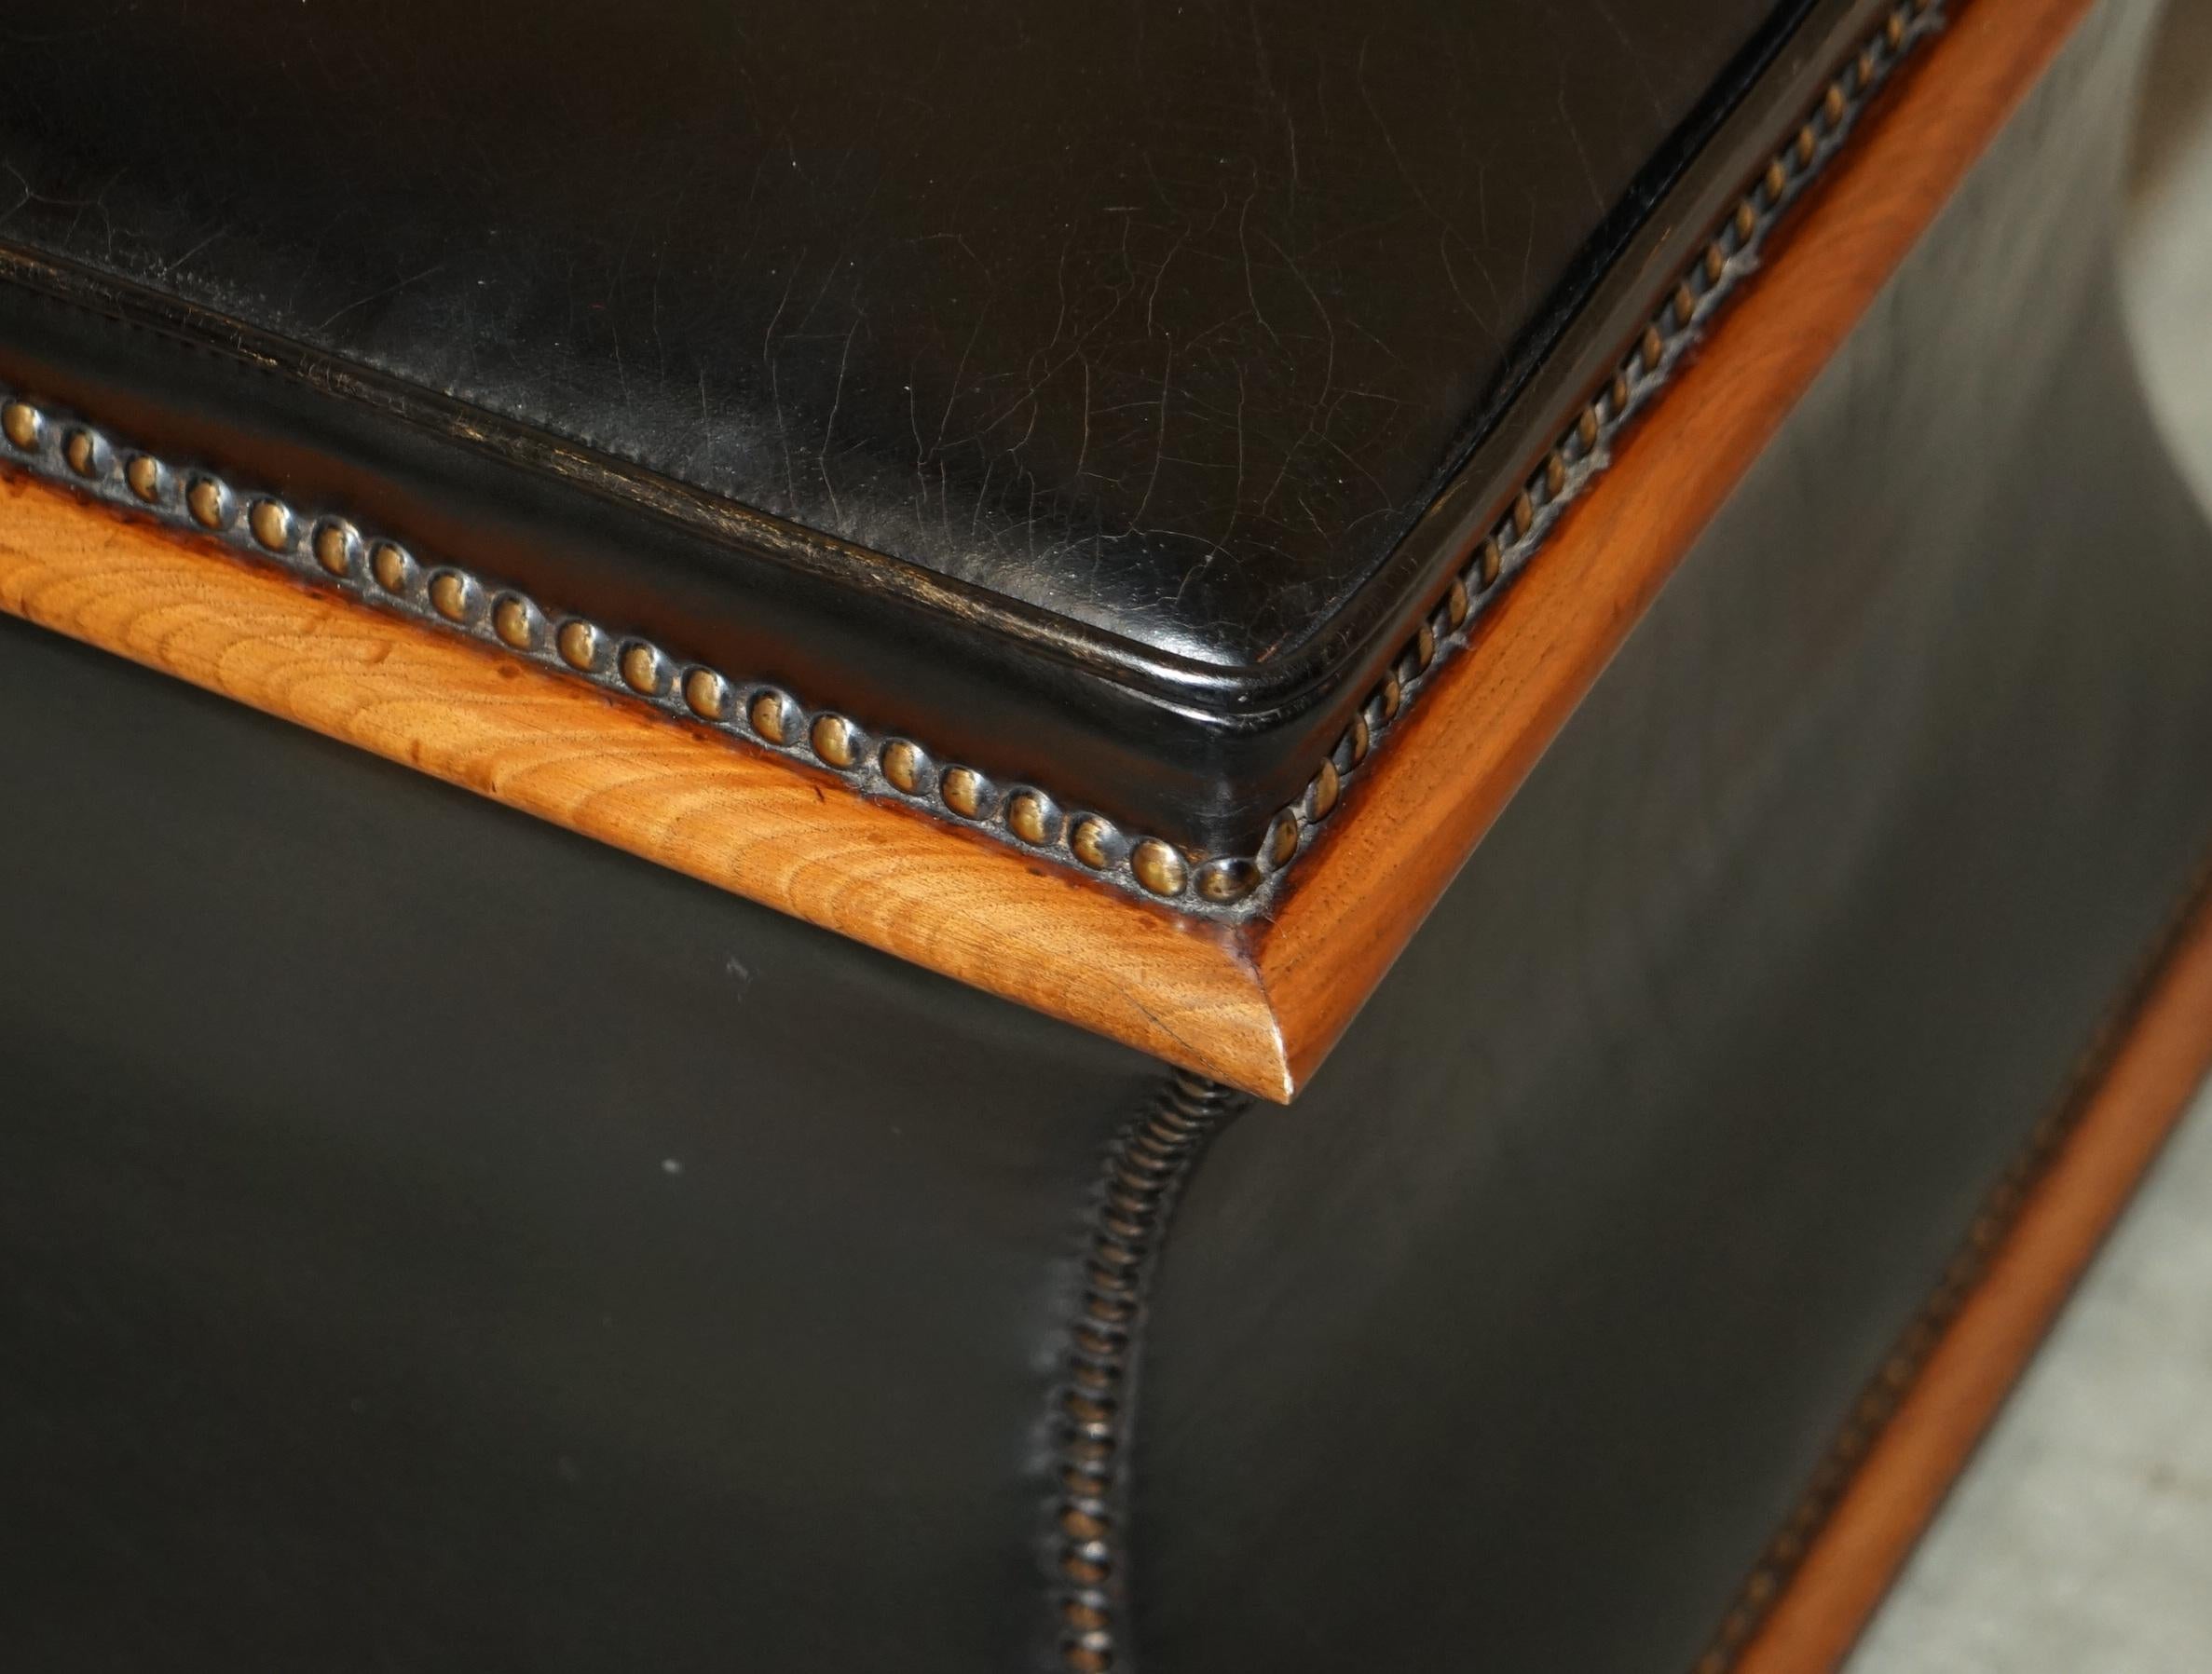 High Victorian EXQUISITE VICTORIAN CiRCA 1860 TAN BLACK LEATHER OTTOMAN STOOL FOOTSTOOL STORAGE For Sale